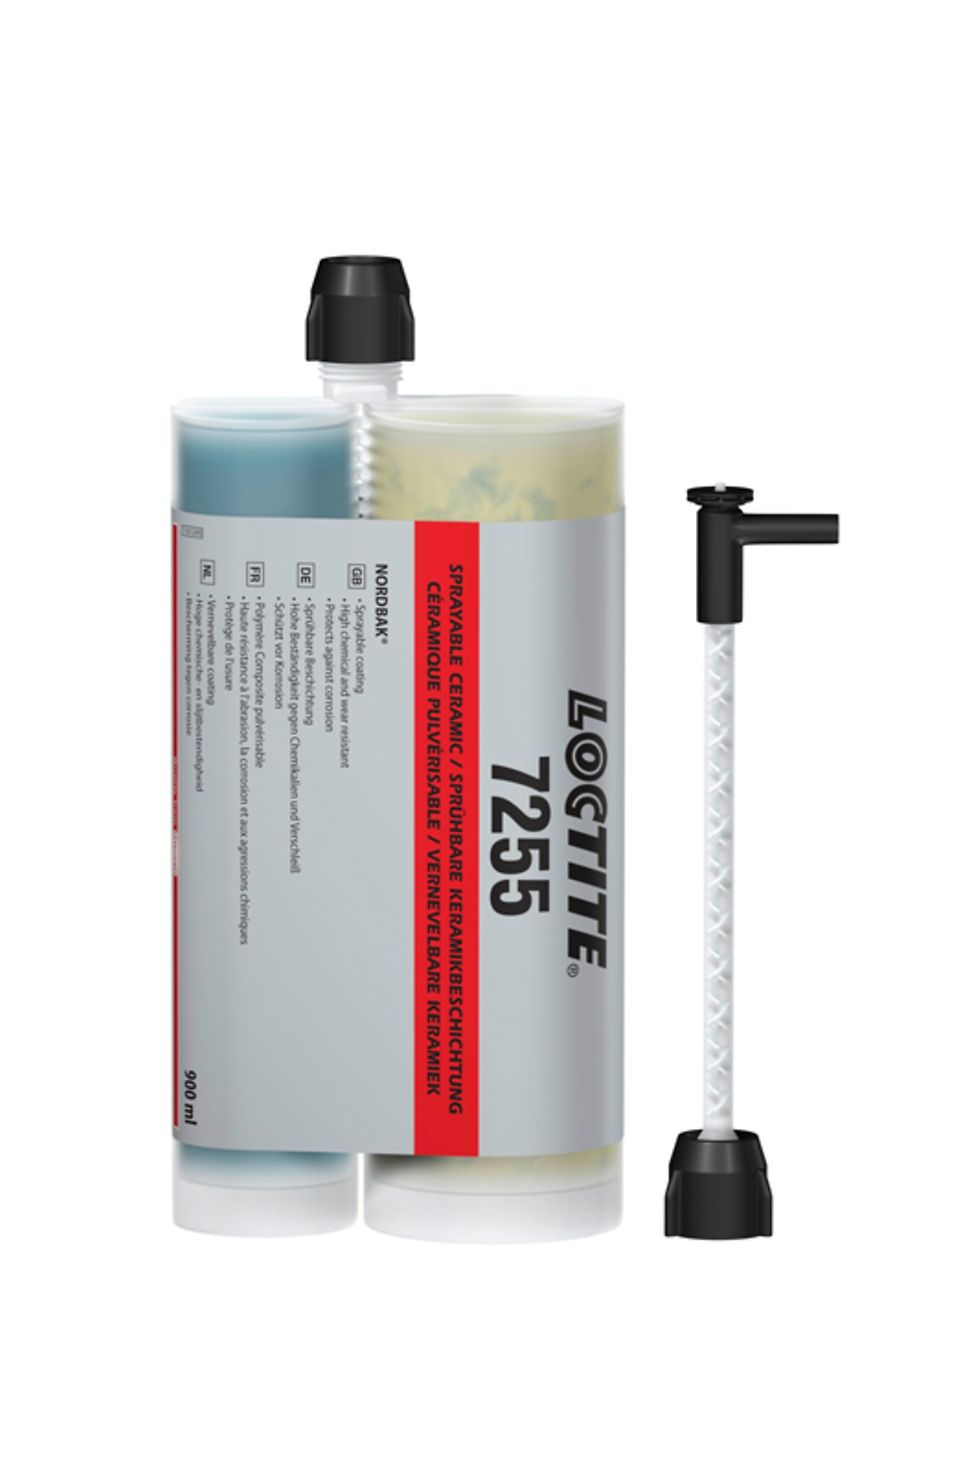 The sprayable ceramic topcoat Loctite PC 7255 protects steel pipes against corrosion and wear.